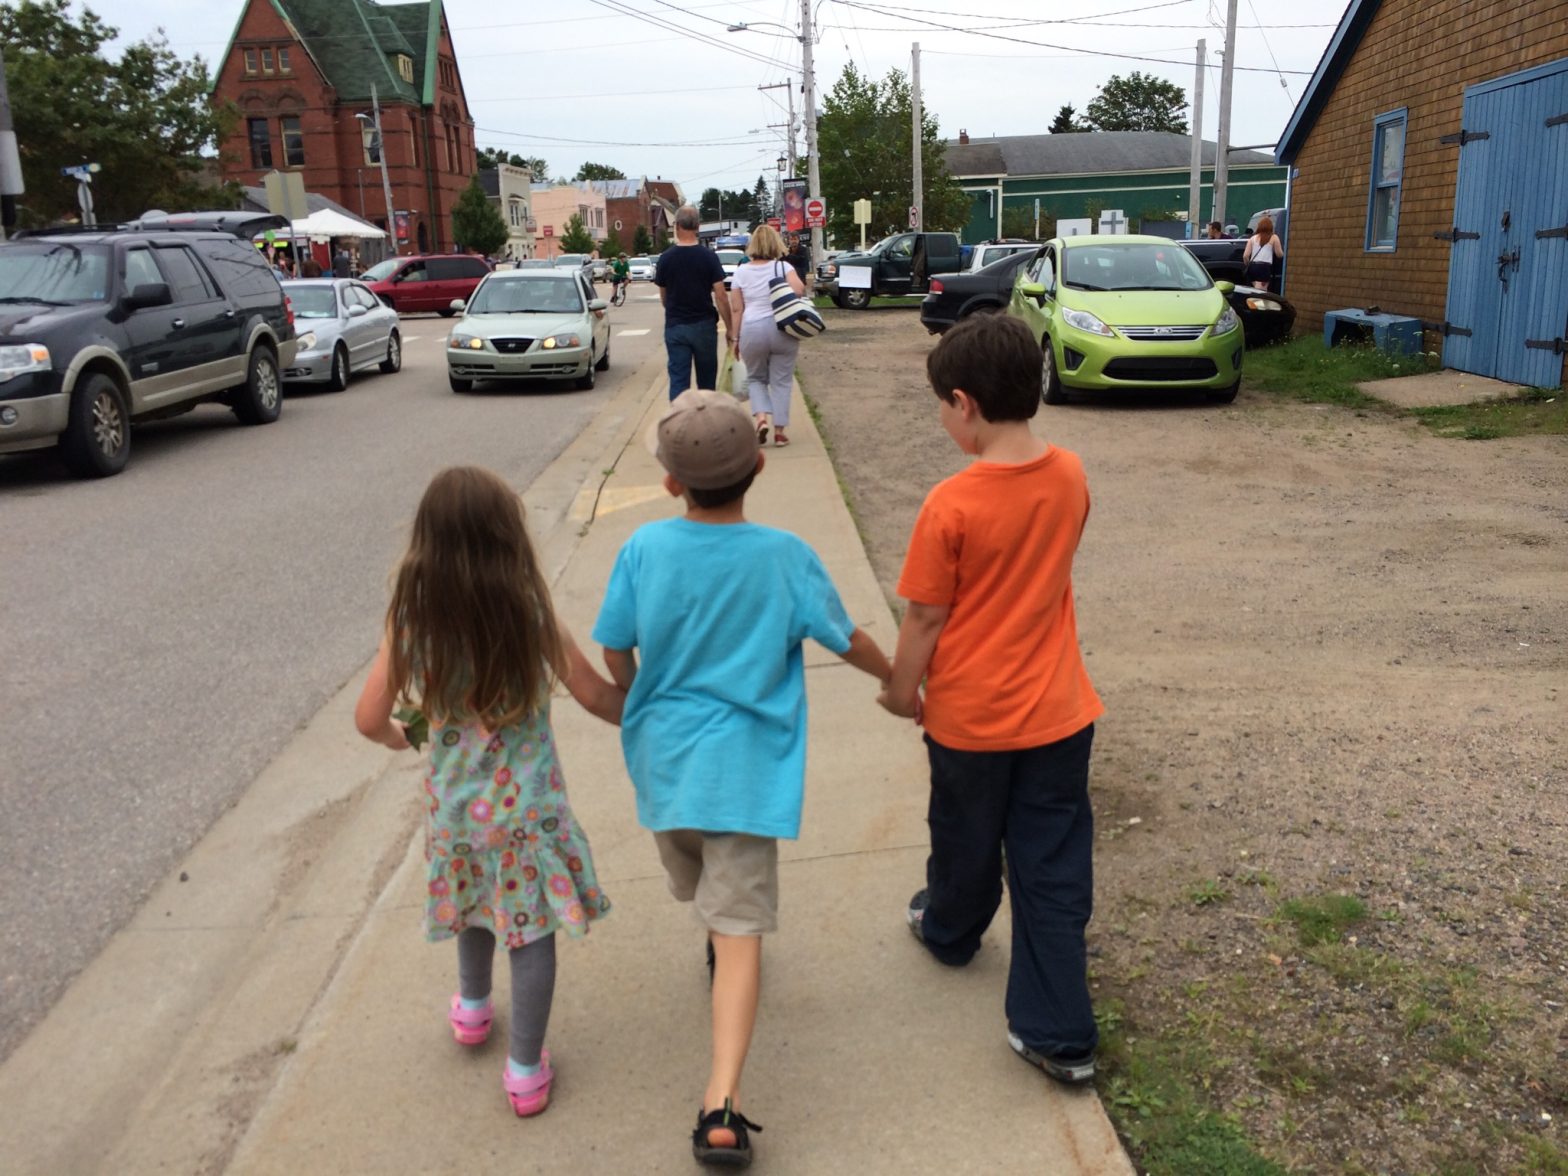 Three children from the back holding hands walking down a sidewalk